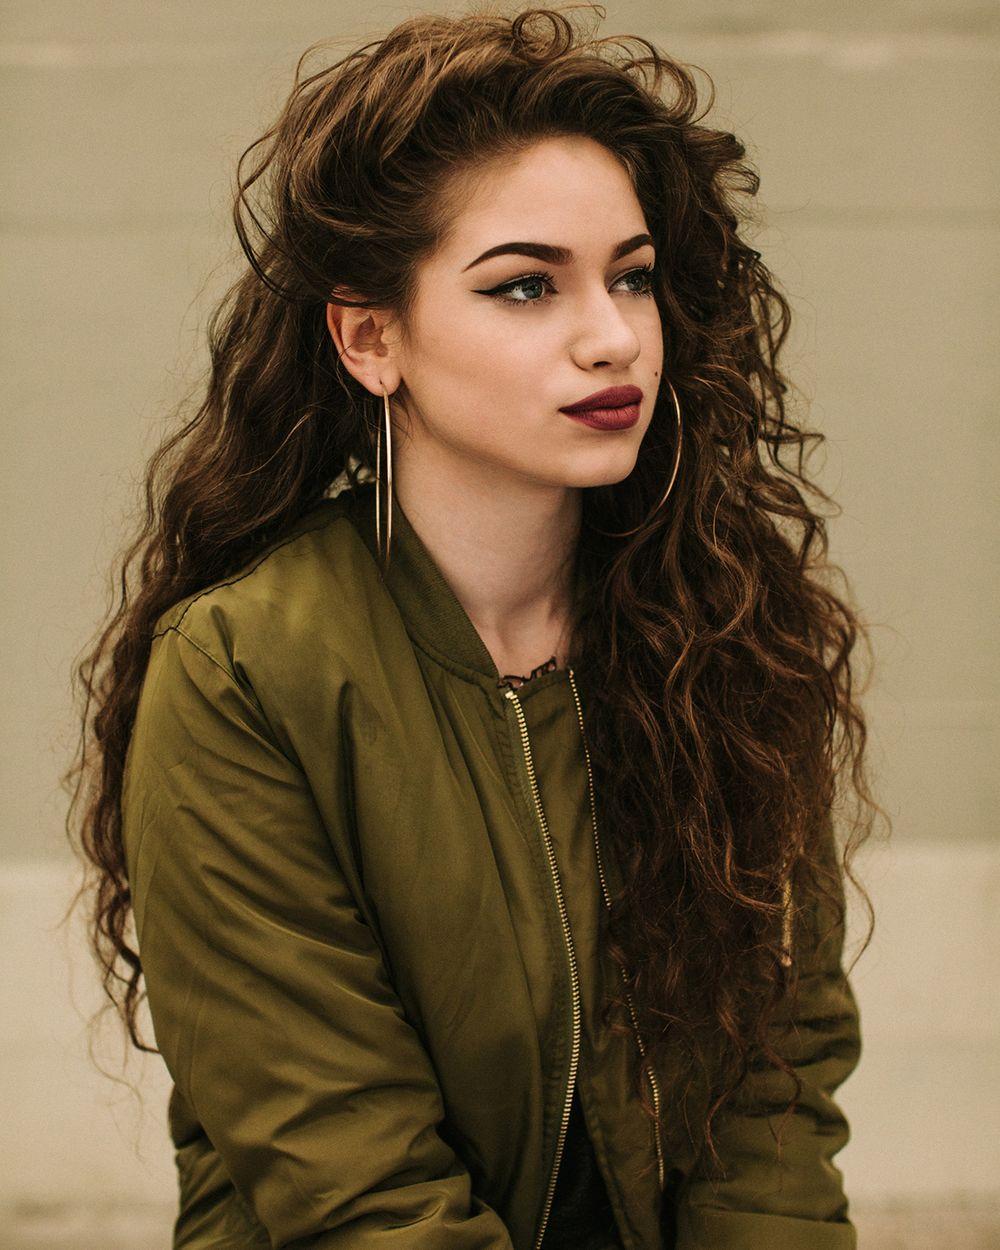 Dytto model and pop dancer. I WANT HER HAIR! My dream